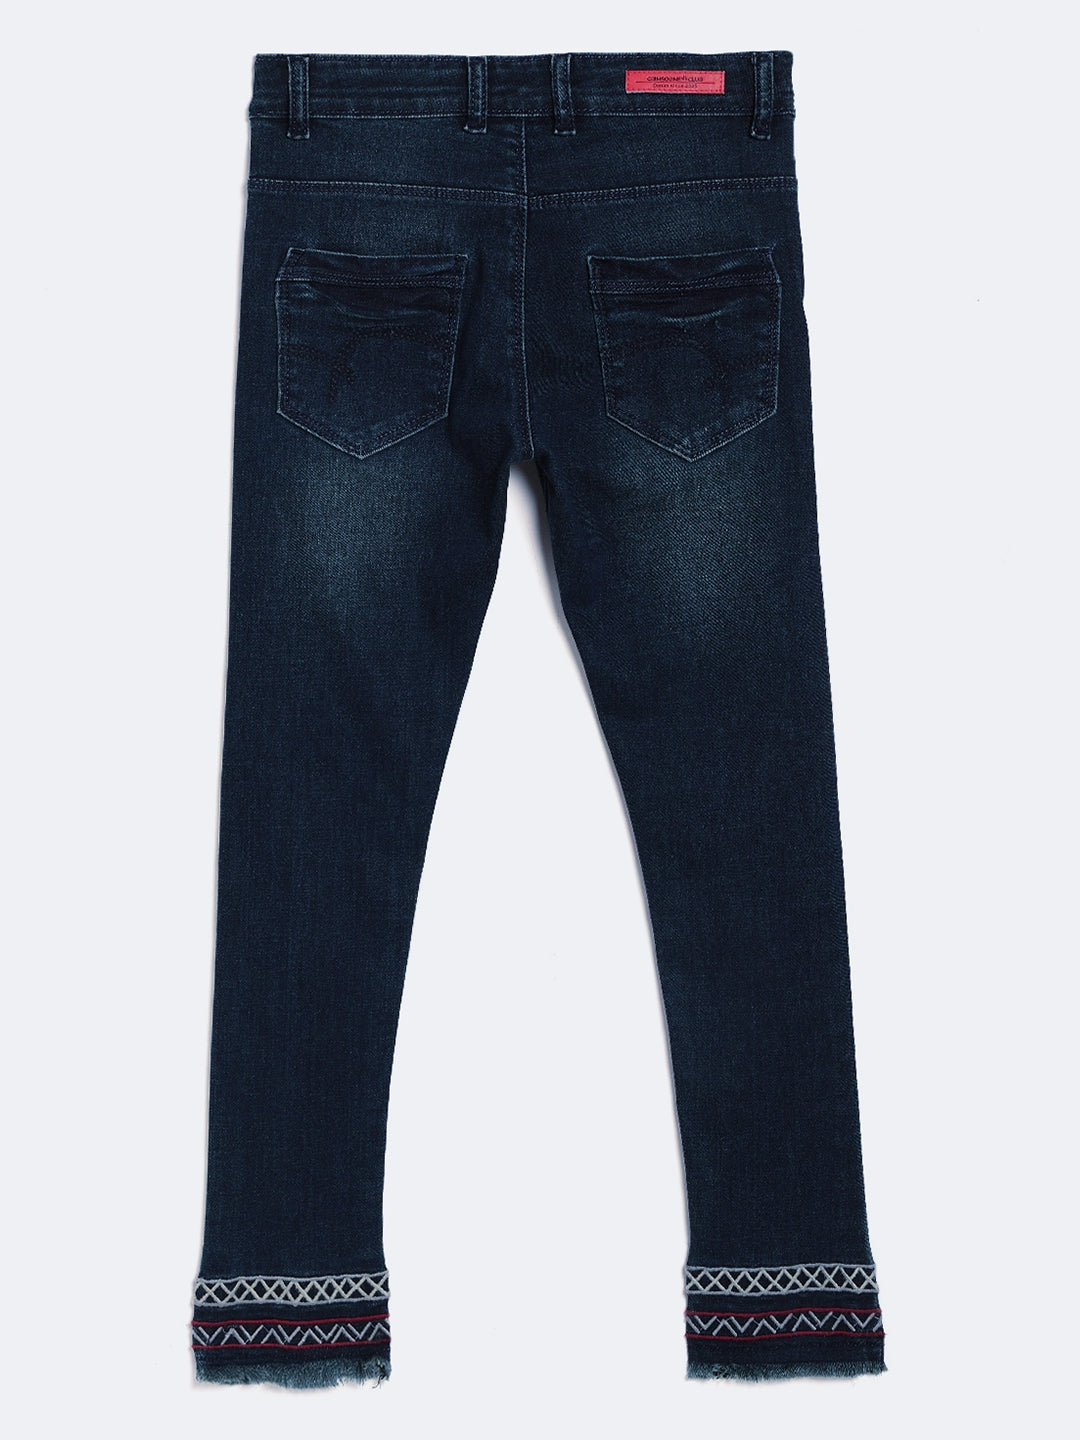 Blue Embroidered jeans - Girls Jeans